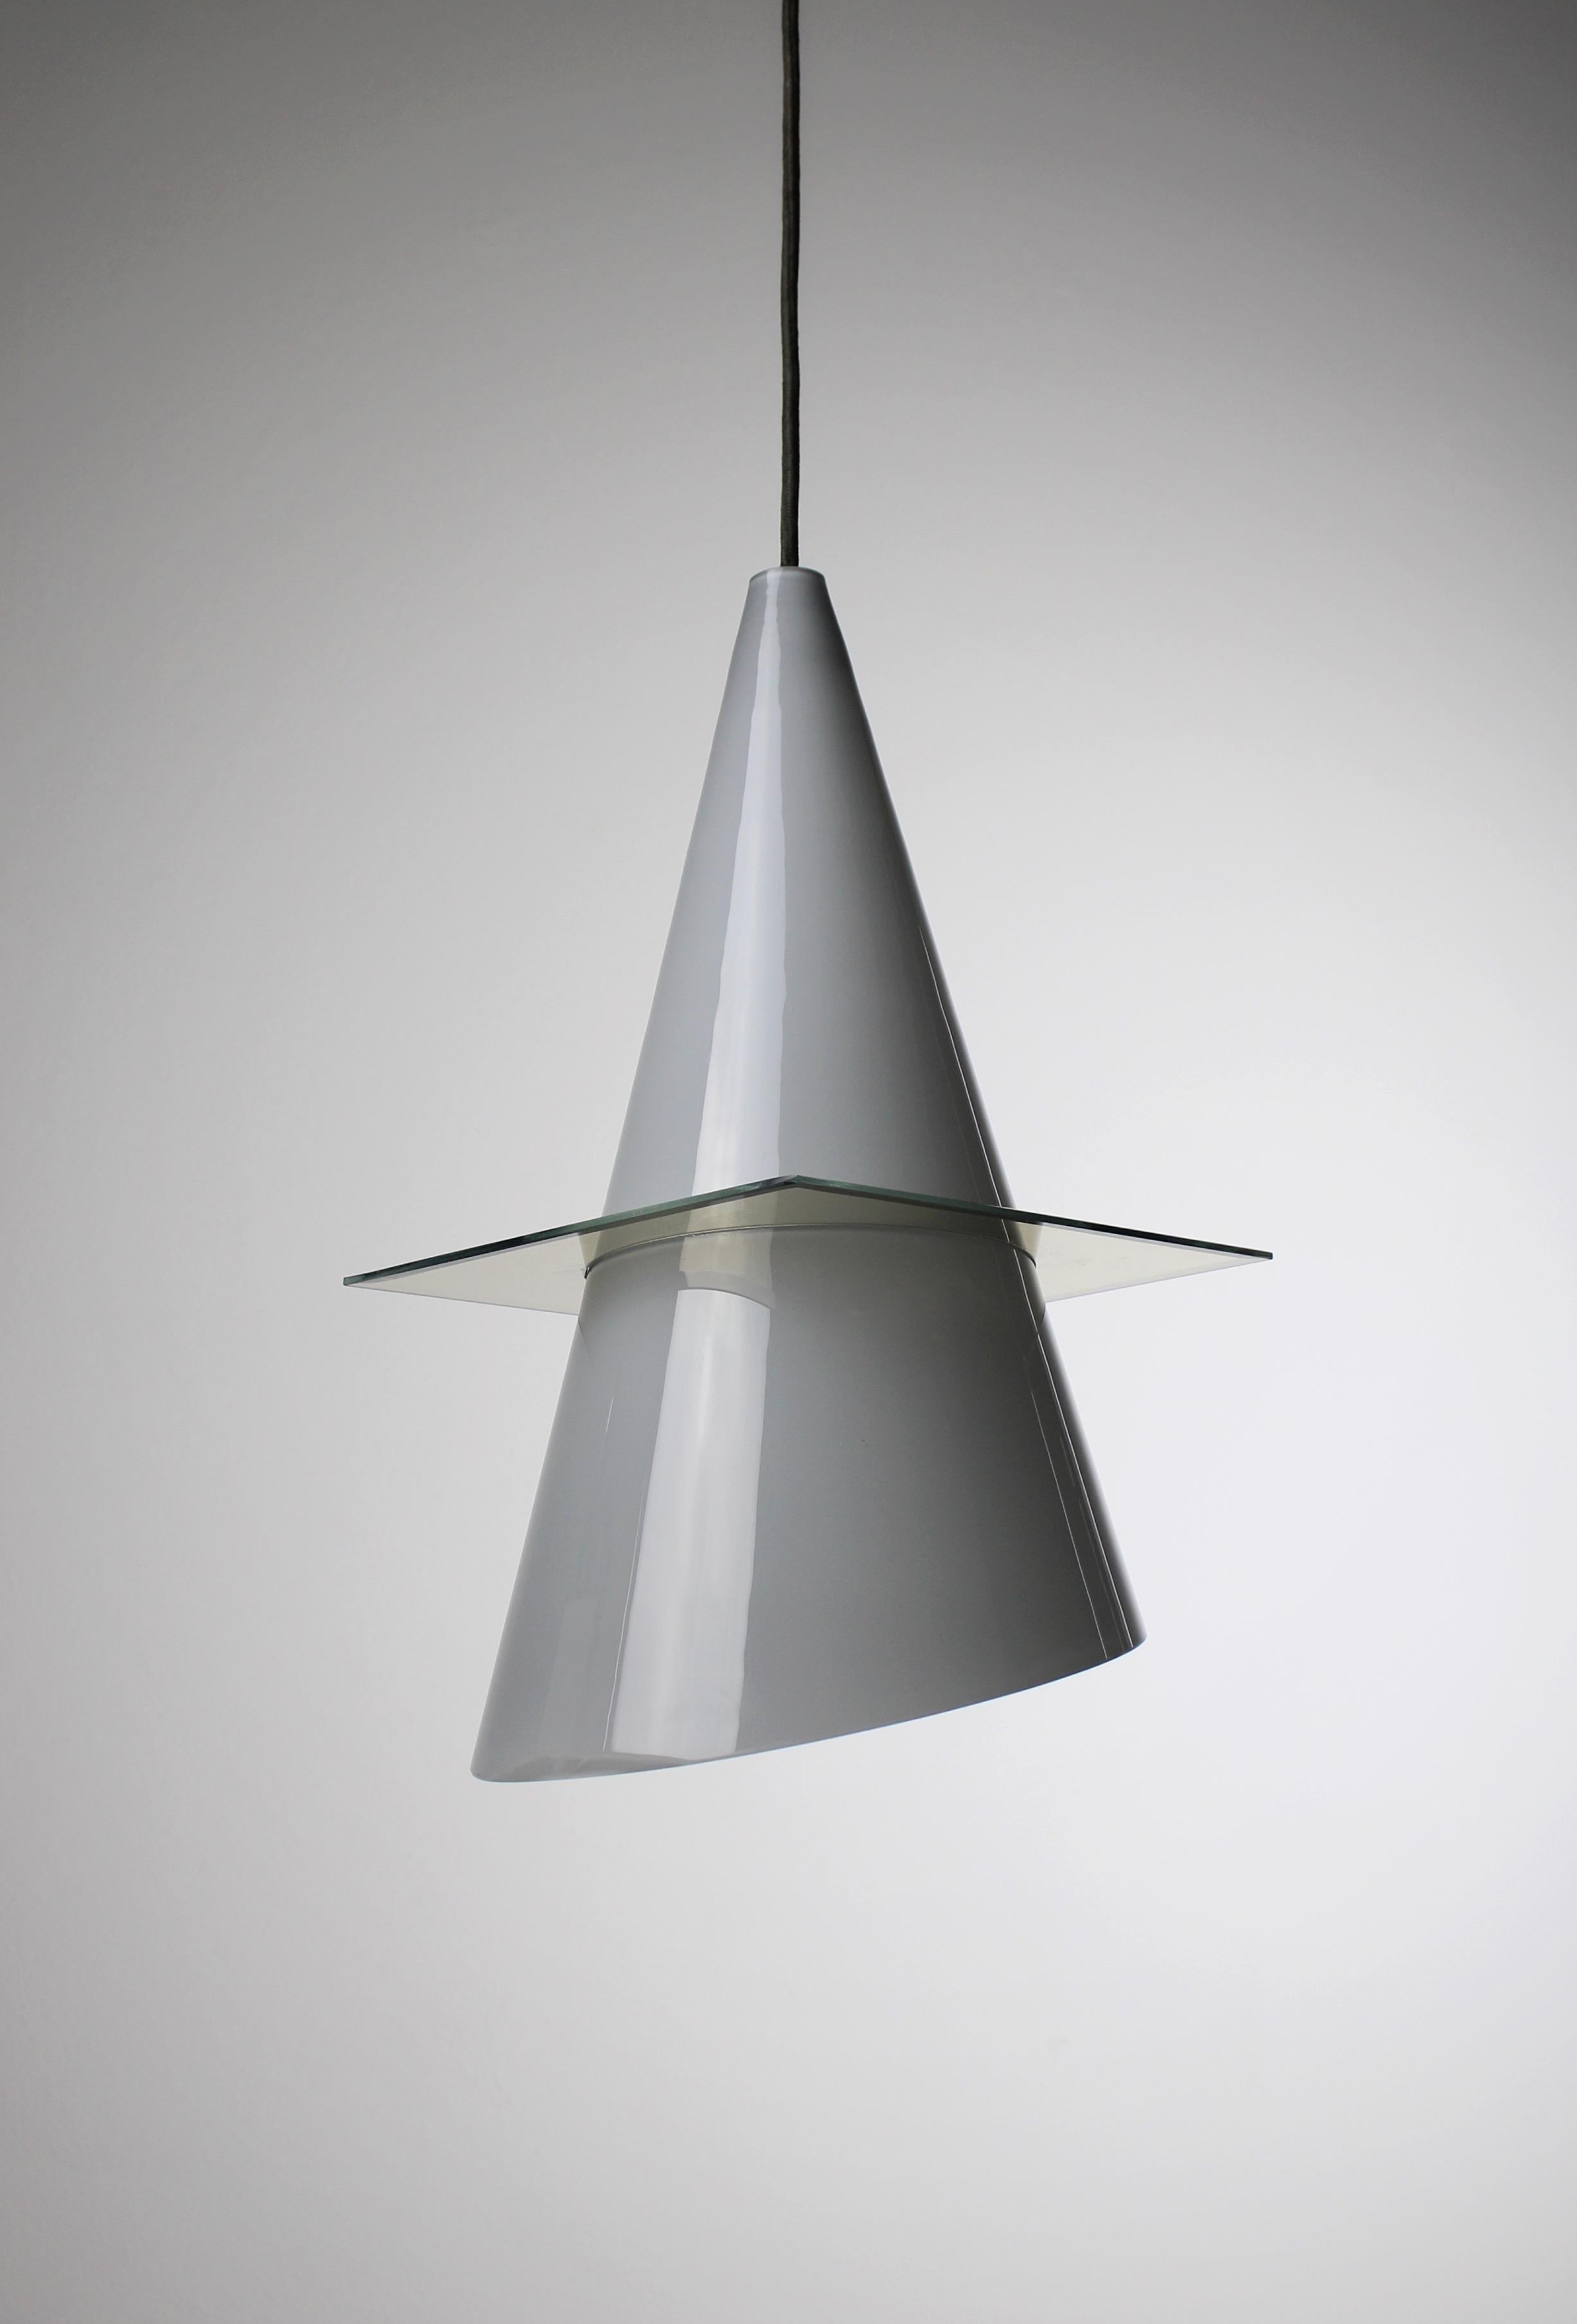 The OZ pendant lamp, designed by Daniele Puppa & Franco Raggi in 1980. Crafted by the esteemed lighting manufacturer Fontana Arte in northern Italy during the 1980s, this exquisite piece boasts a strikingly modern design. Its sleek silhouette is